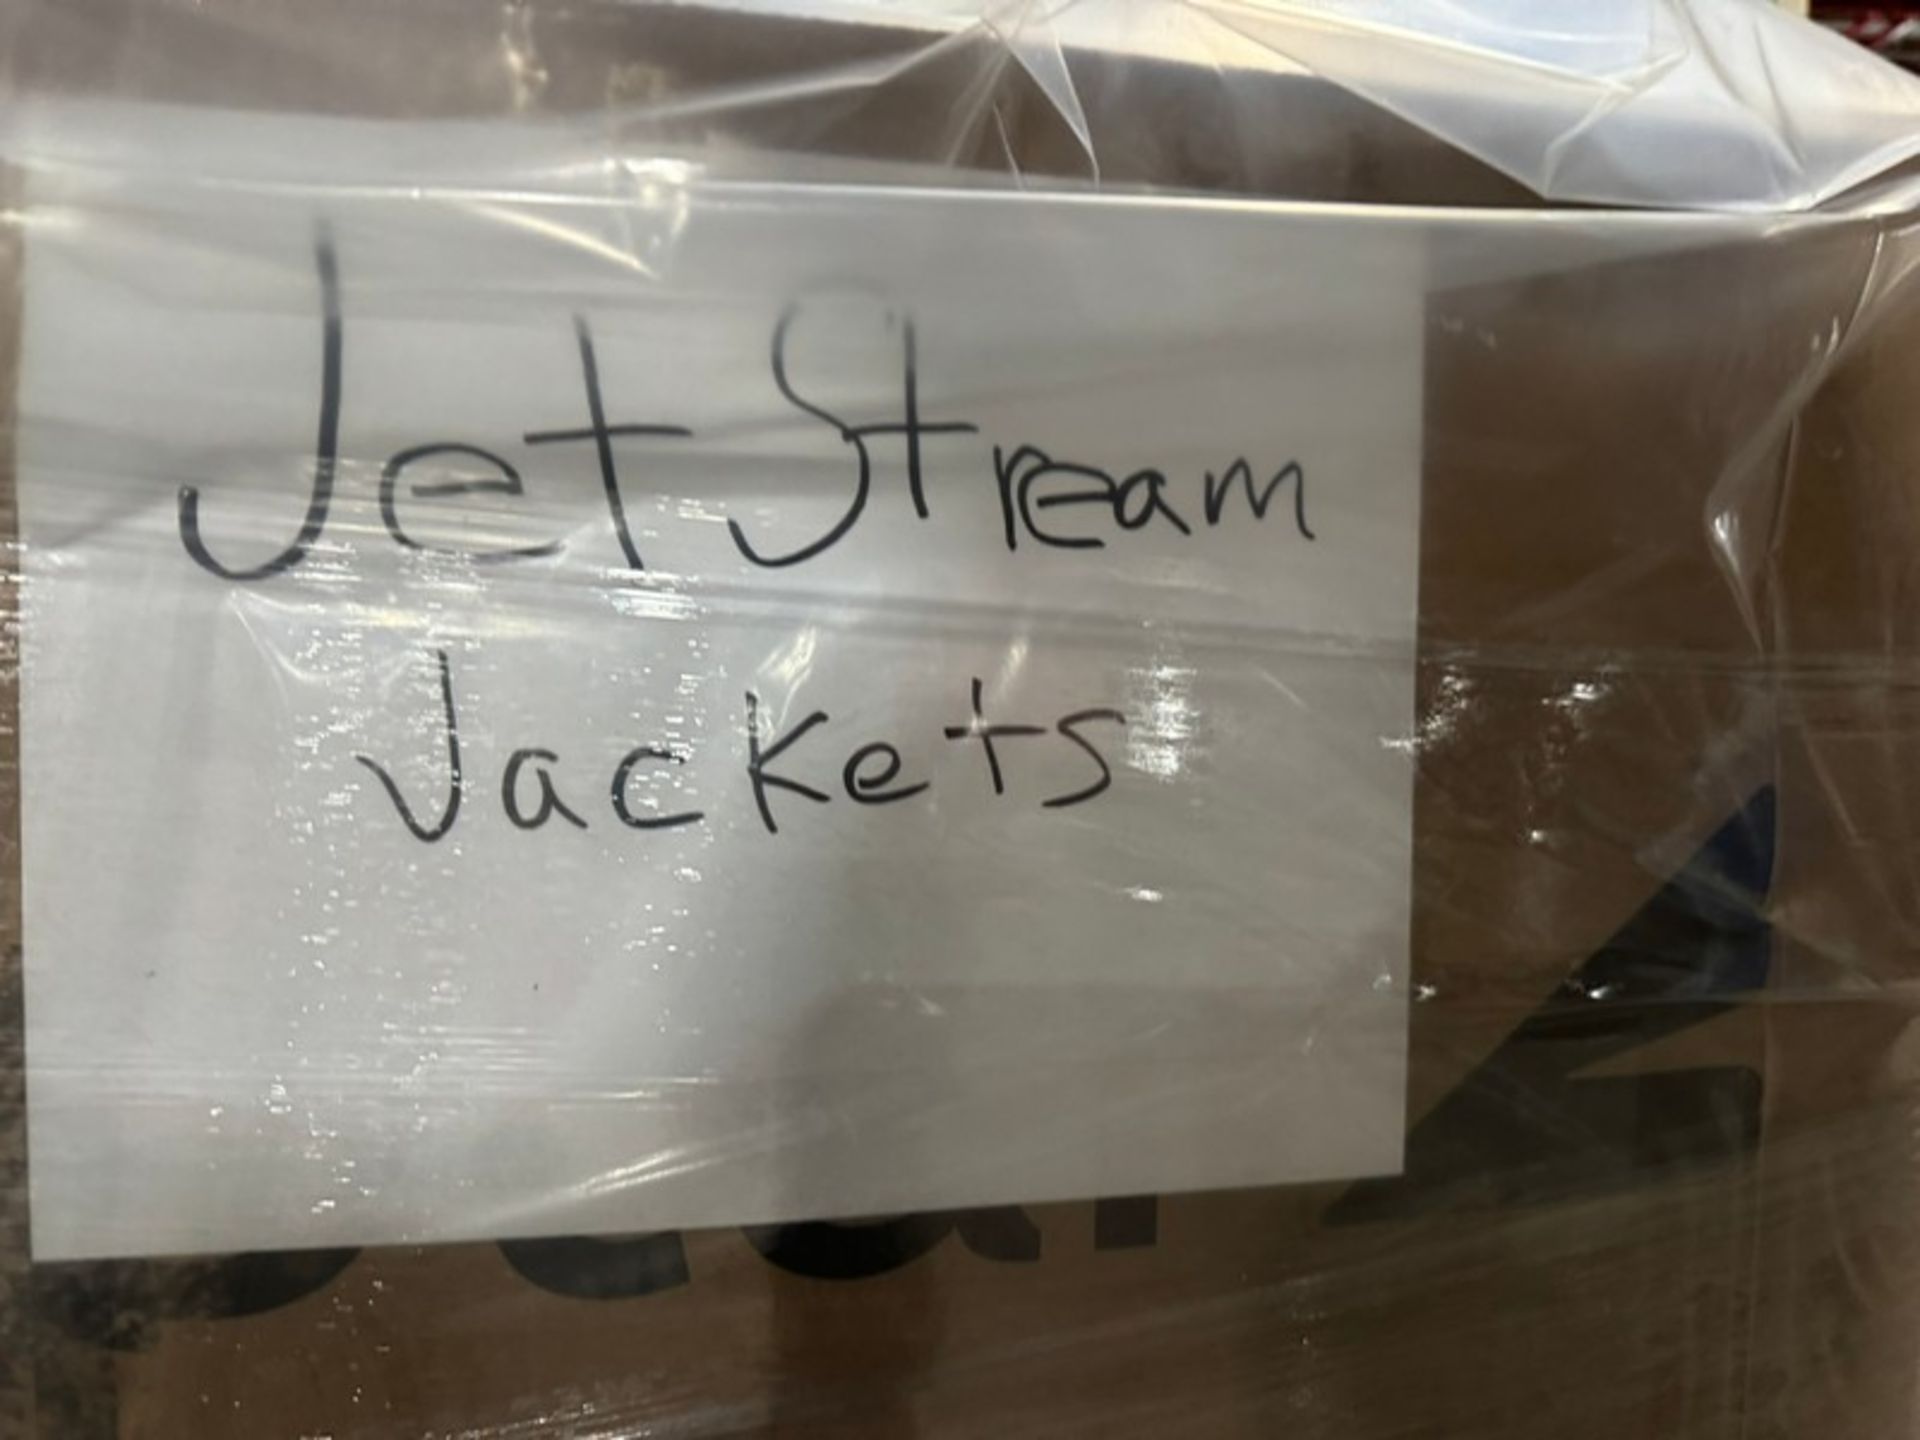 NEW Jet Stream Equipment, Includes NEW Jackets, Helmets, Pants, Leggins (LOCATED IN FREEHOLD, N.J.) - Image 6 of 9